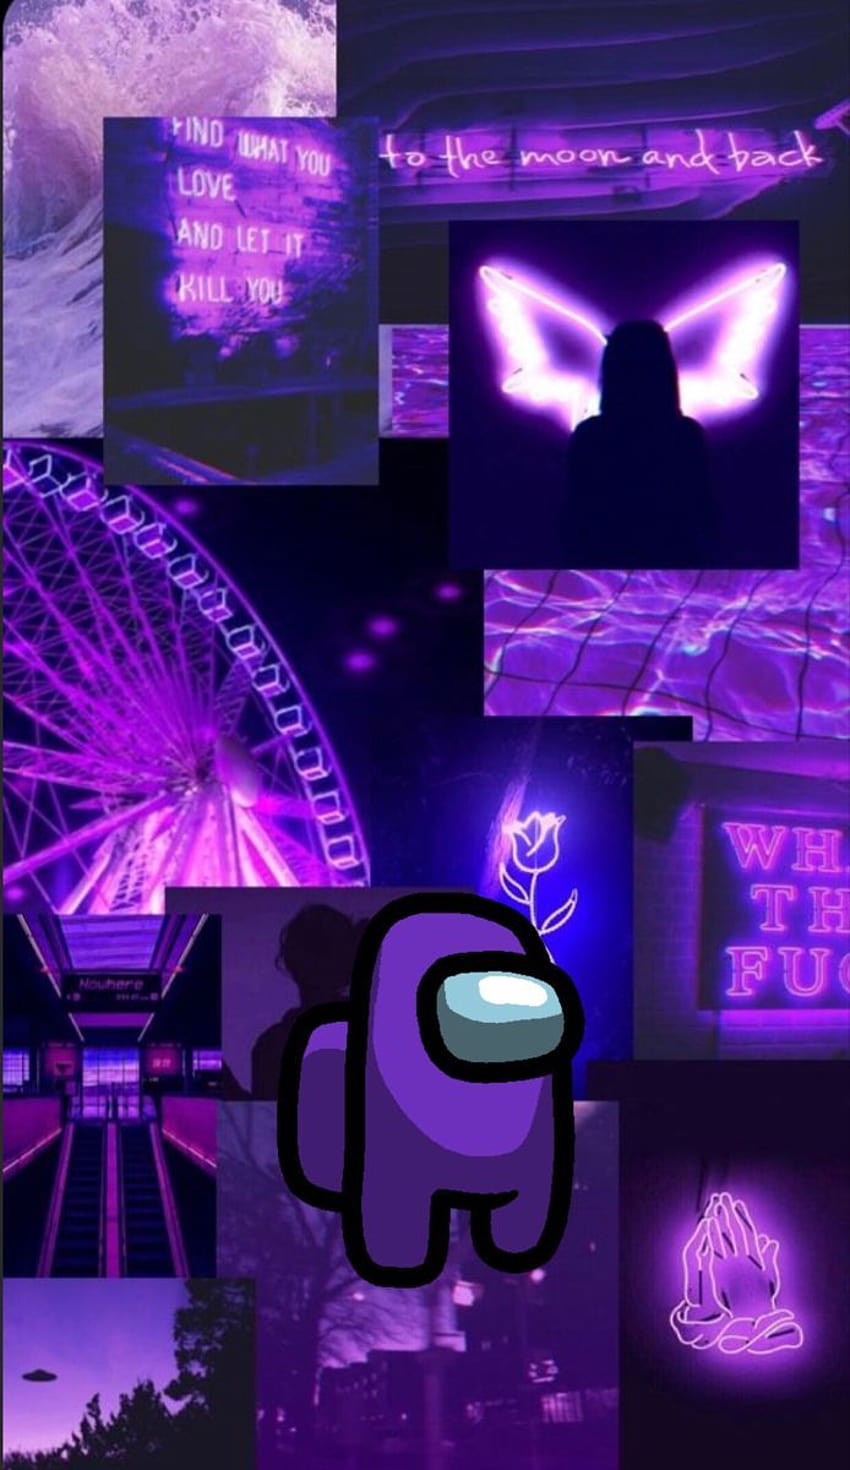 A collage of purple images with text - Among Us